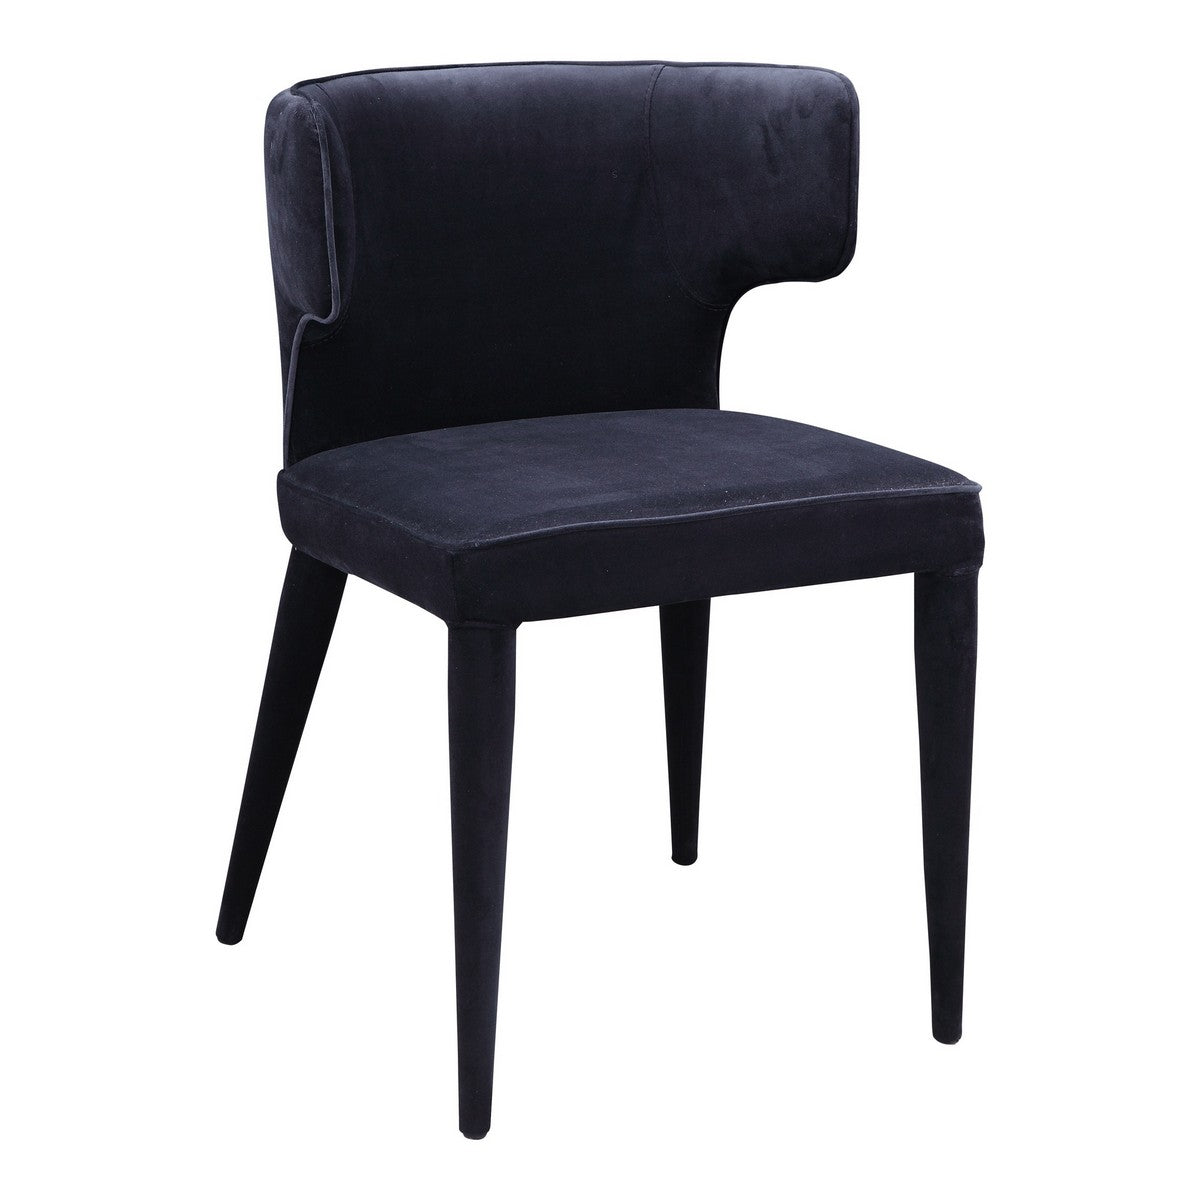 Moe's Home Collection Jennaya Dining Chair Black - EH-1103-02